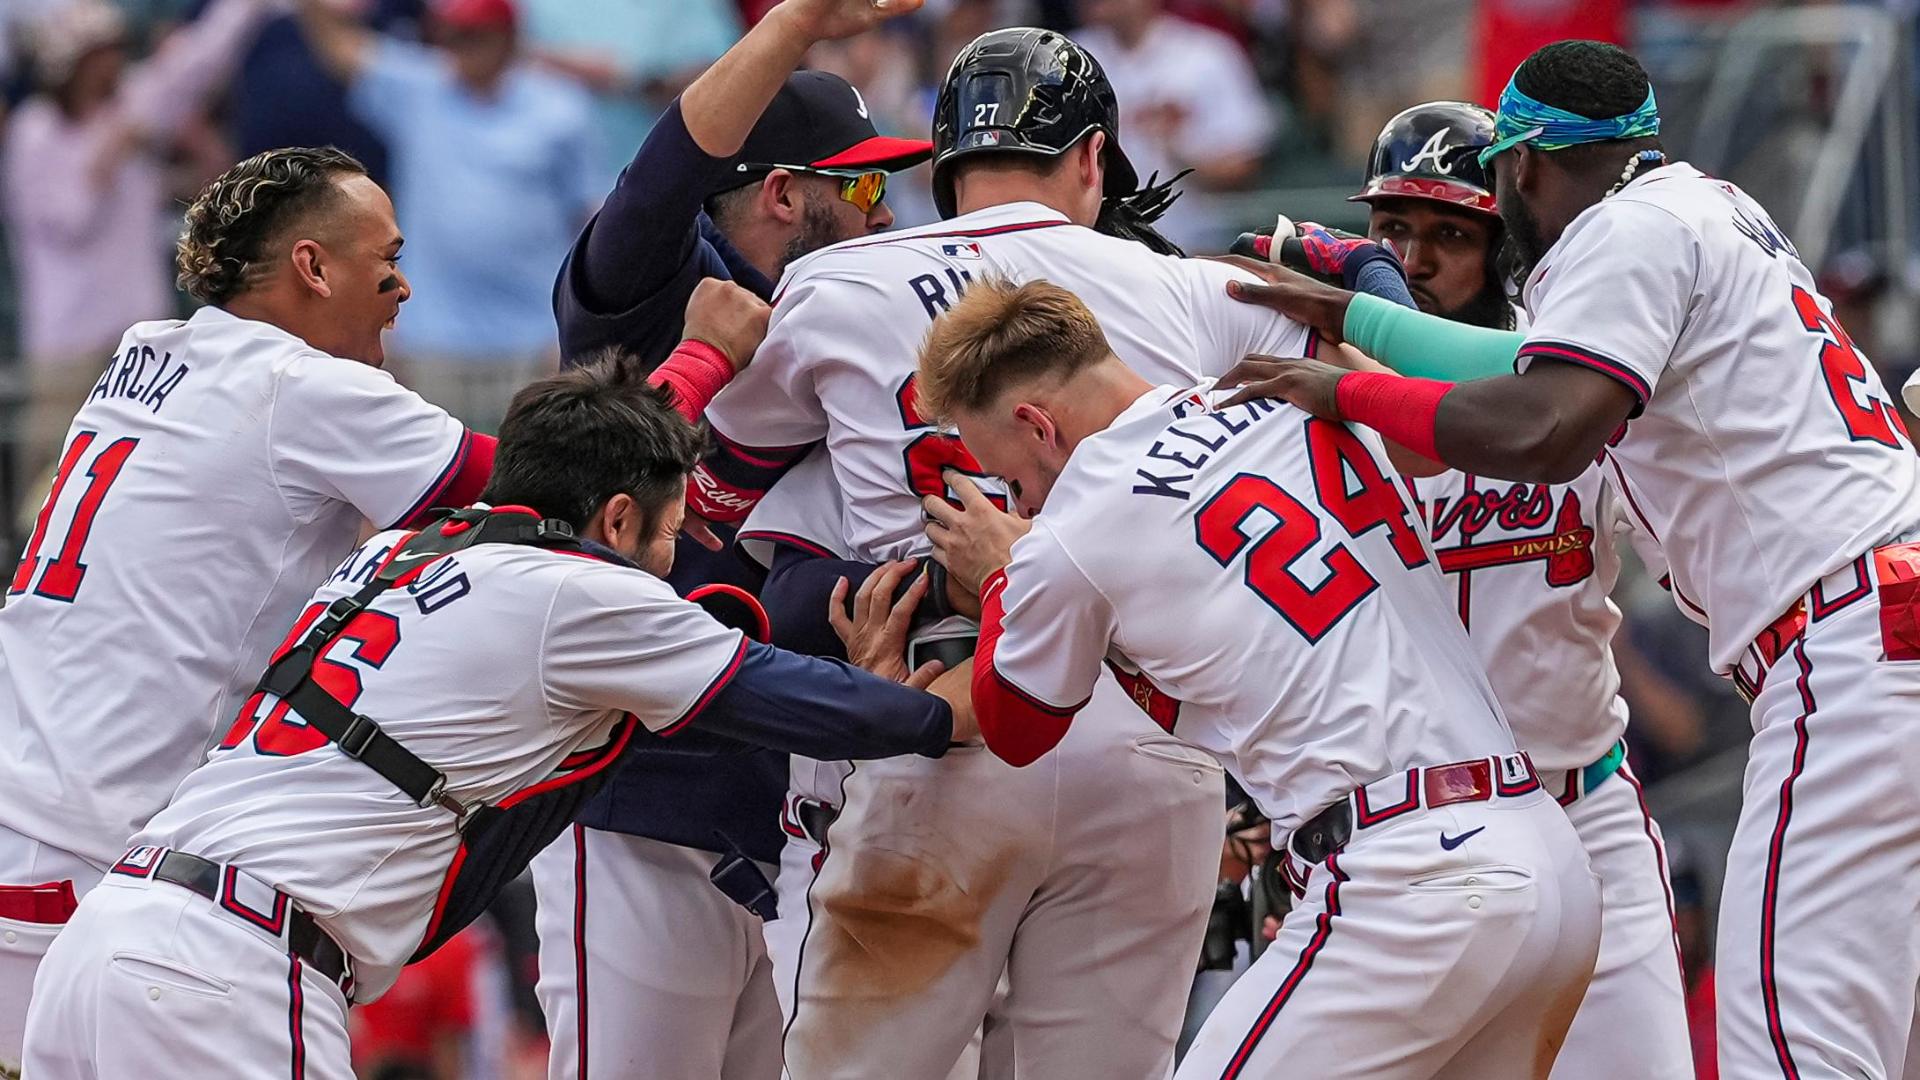 Riley's RBI single in 10th lifts Braves to 4-3 win over Guardians and Atlanta takes 2 of 3 in series